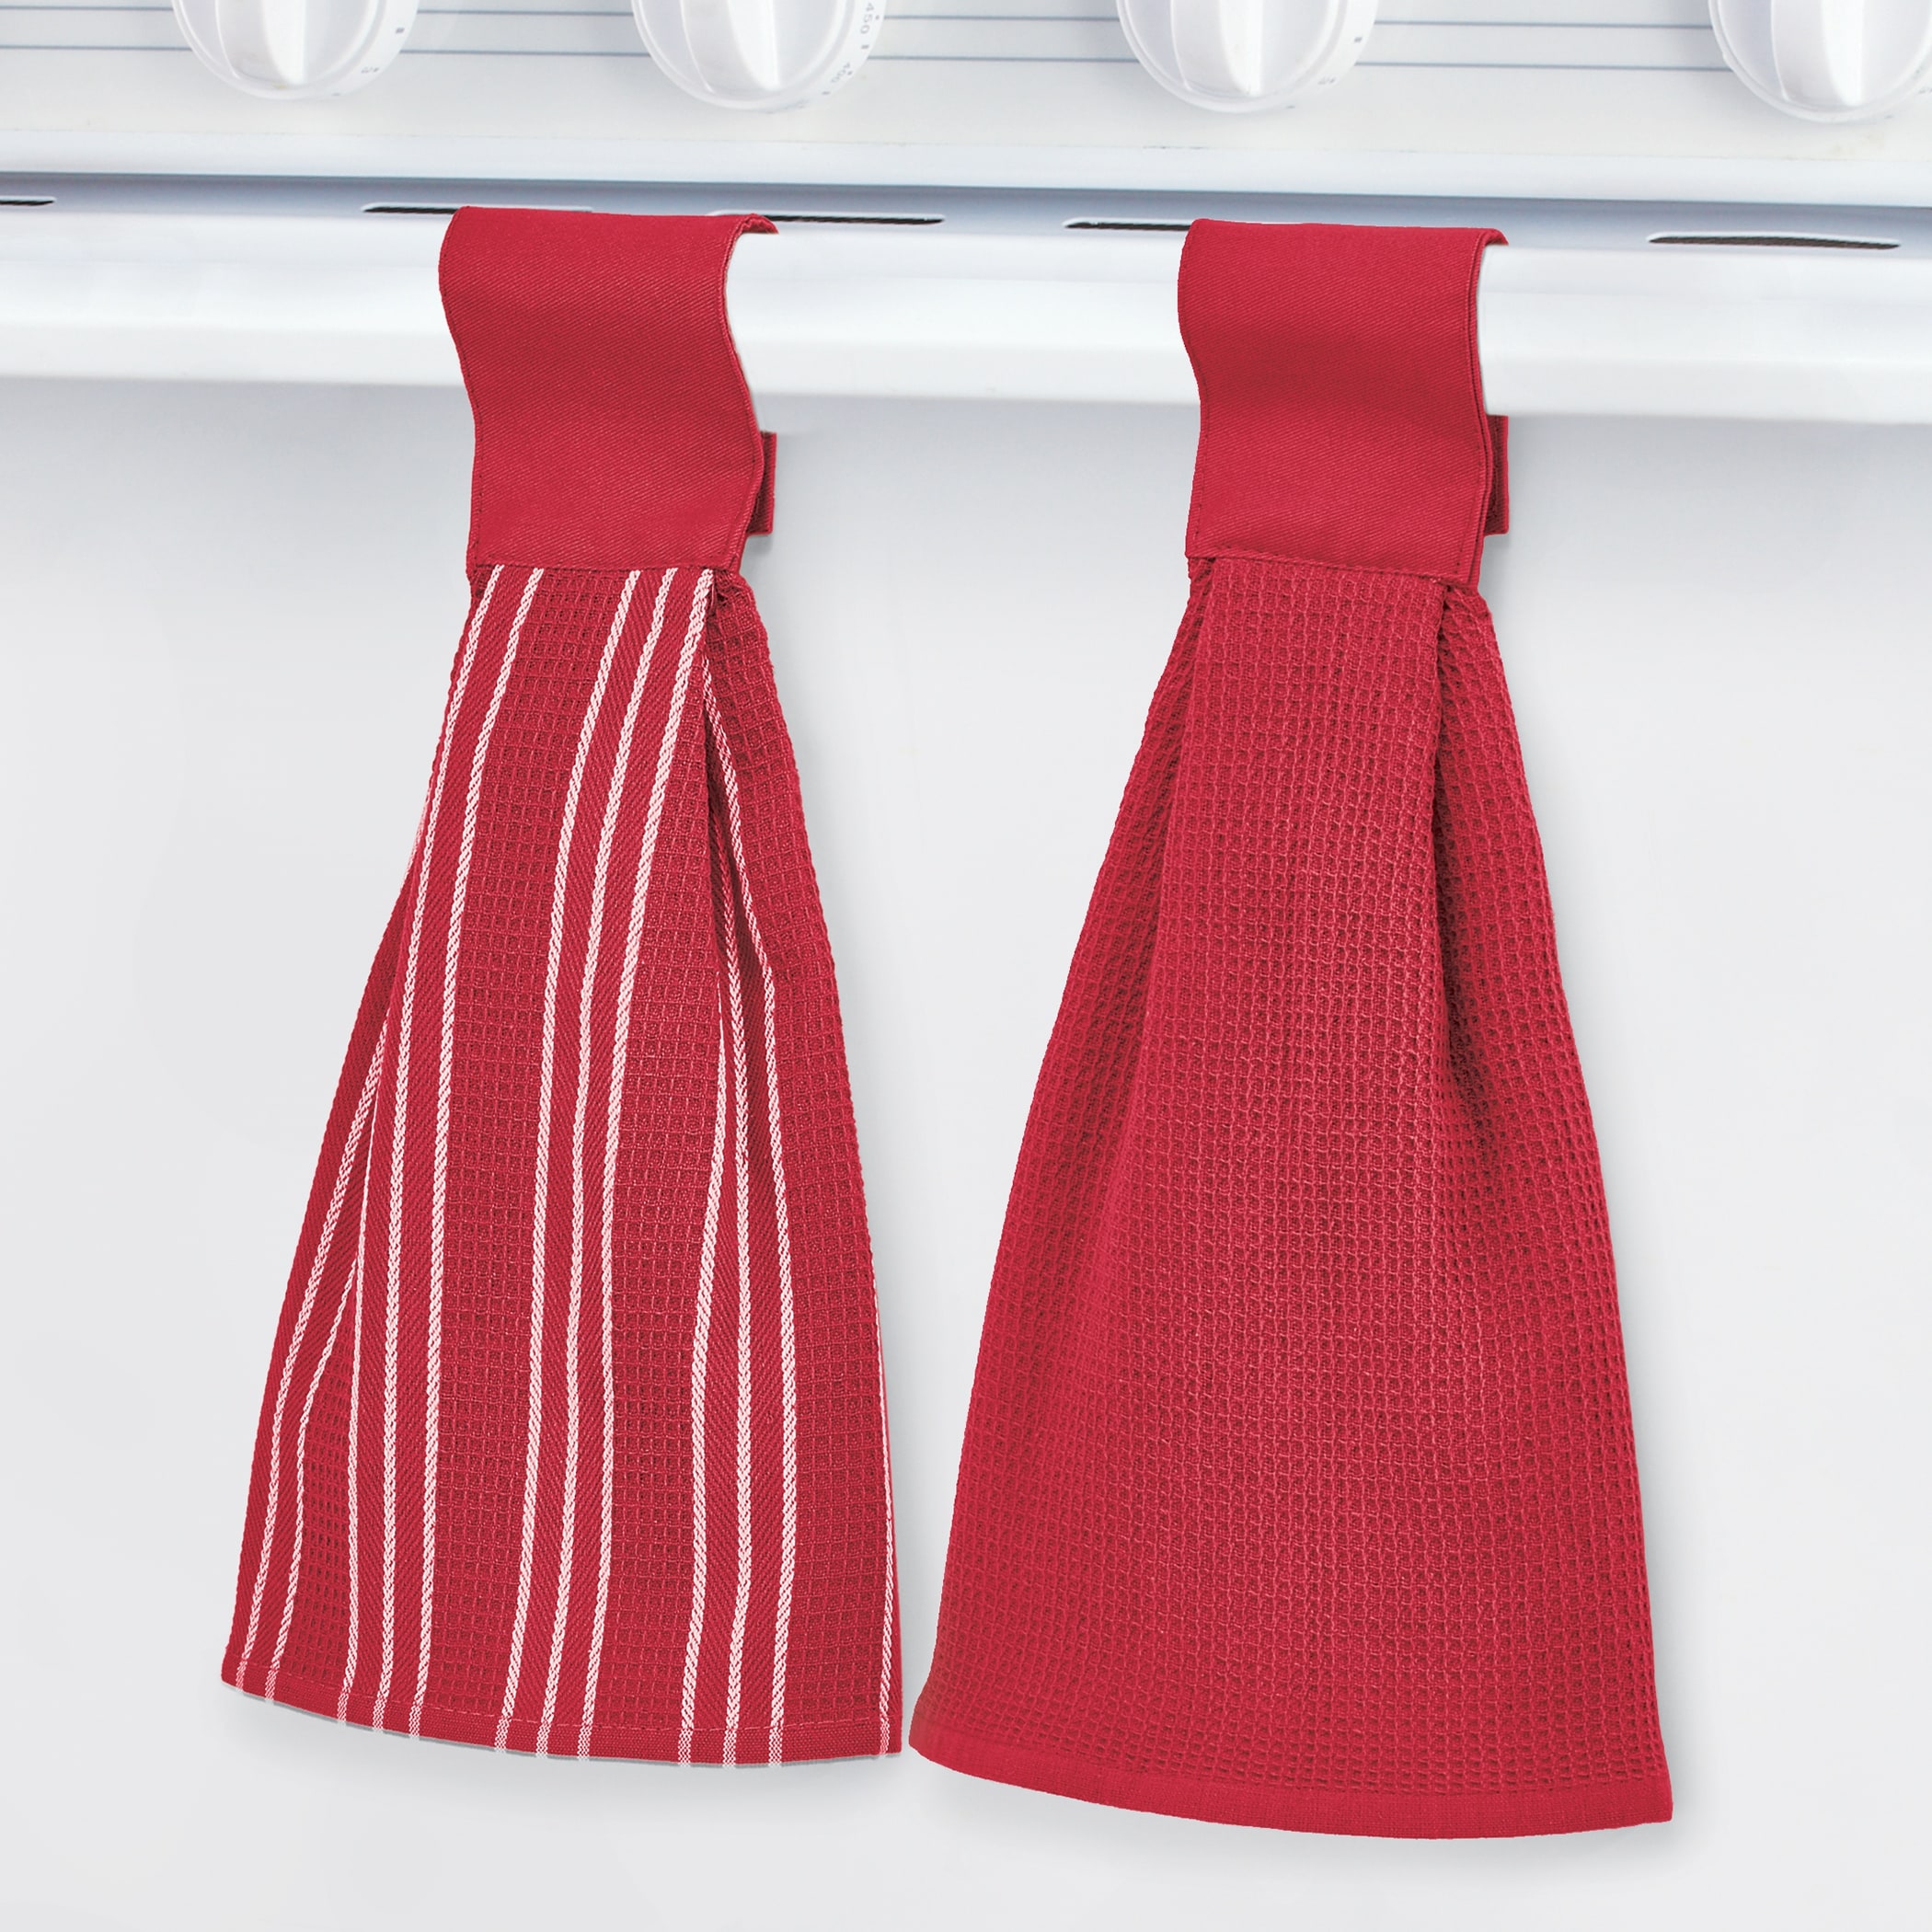 PACK OF 2 HANGING KITCHEN TOWEL